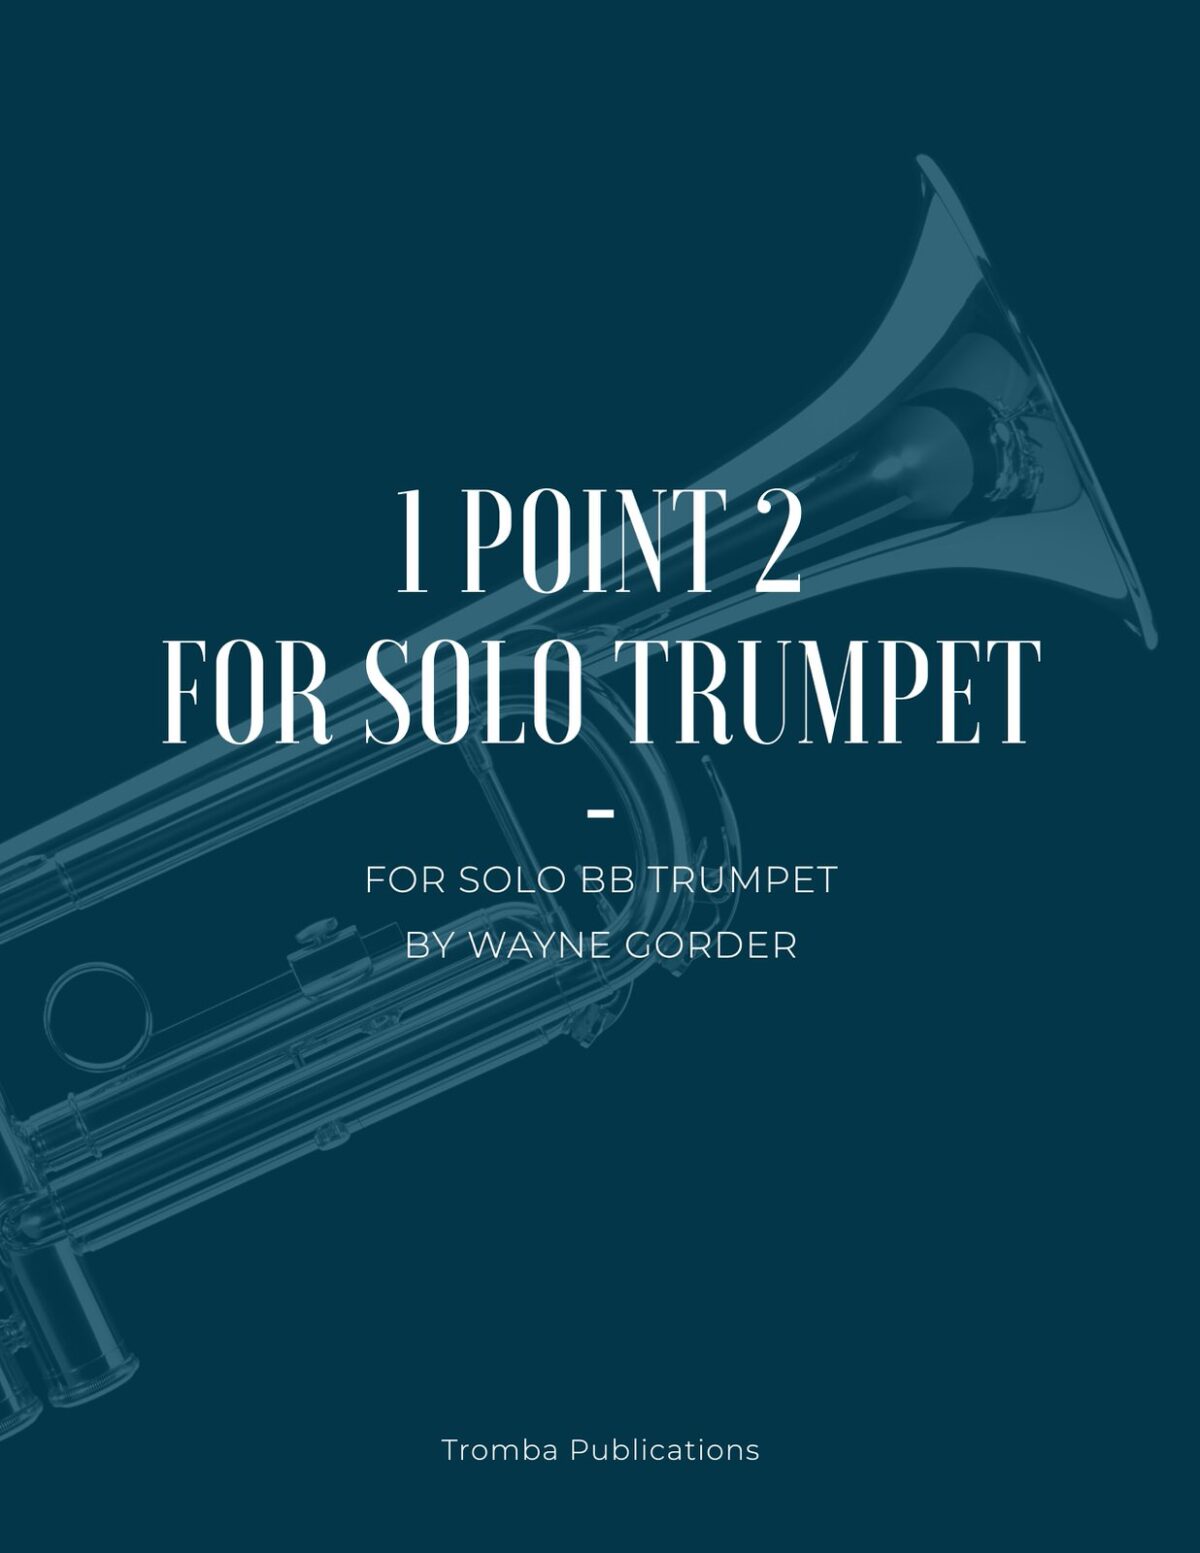 Gorder, 1 Point 2 for Solo Bb Trumpet-p1